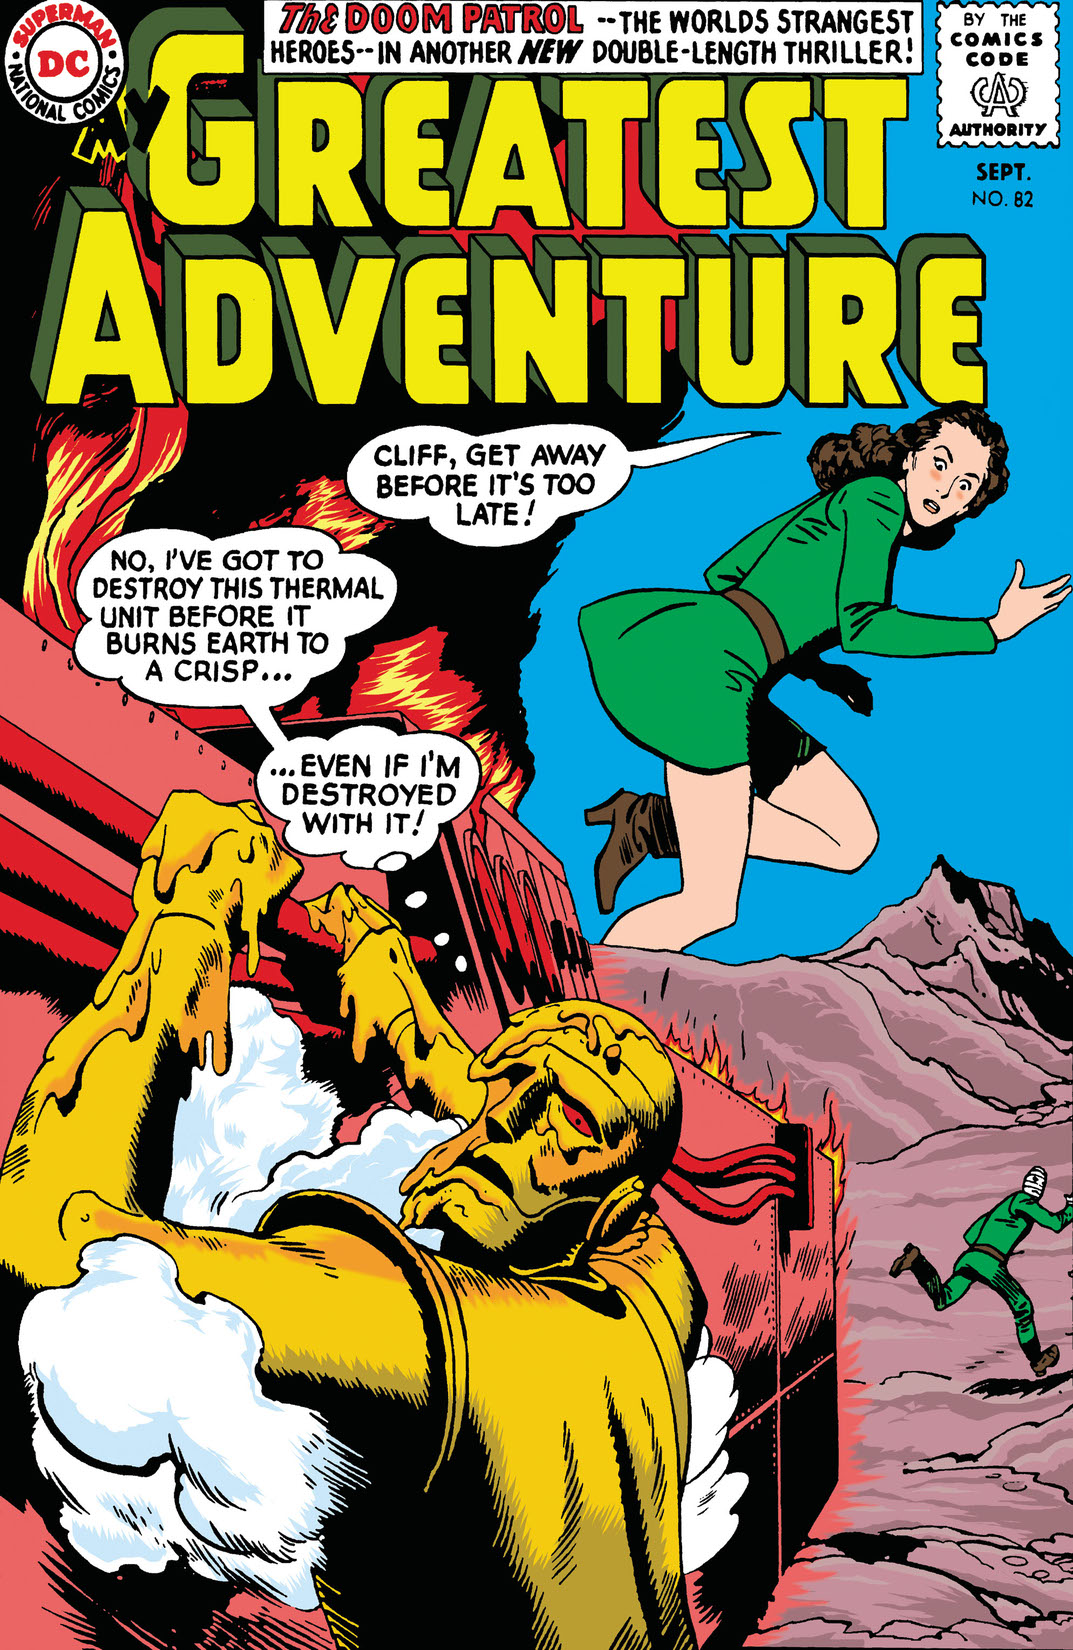 My Greatest Adventure (1955-) #82 preview images